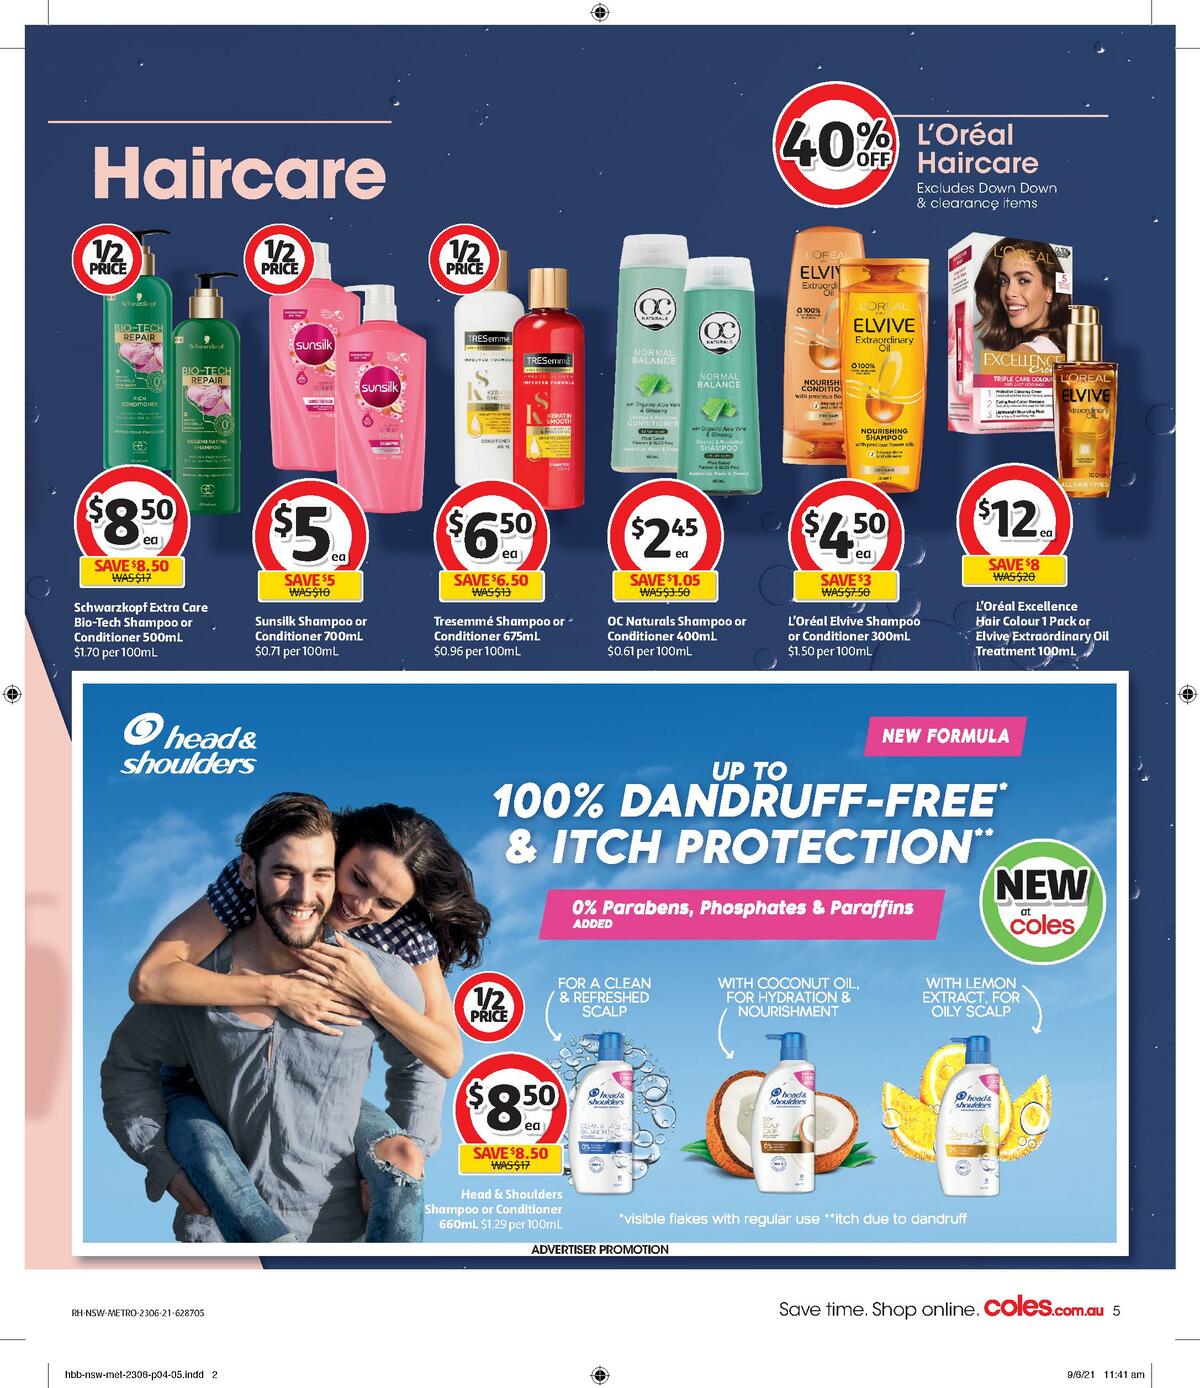 Coles Health & Beauty Catalogues from 23 June